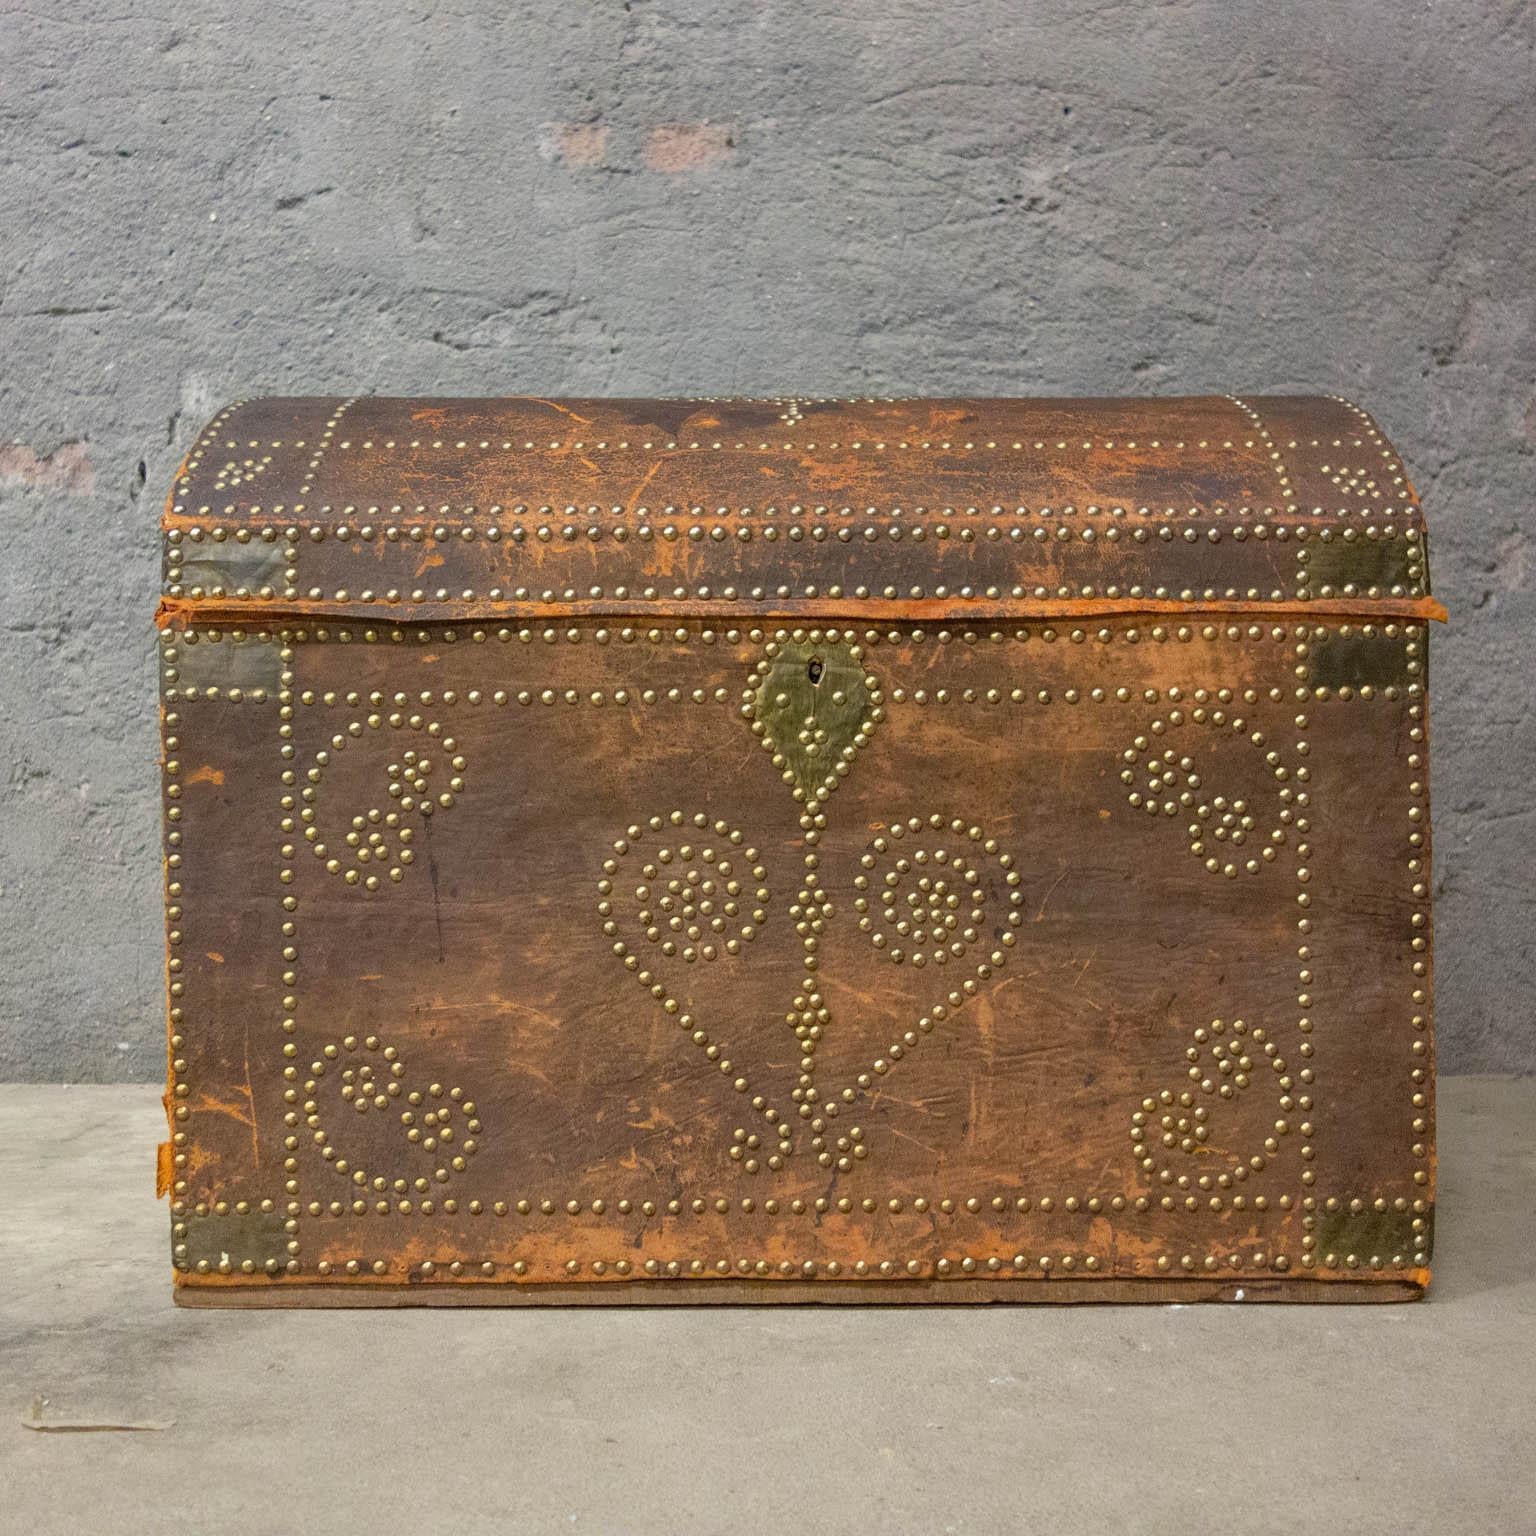 Antique Brown Leather Bridal Box from France, Early 1800 For Sale 2